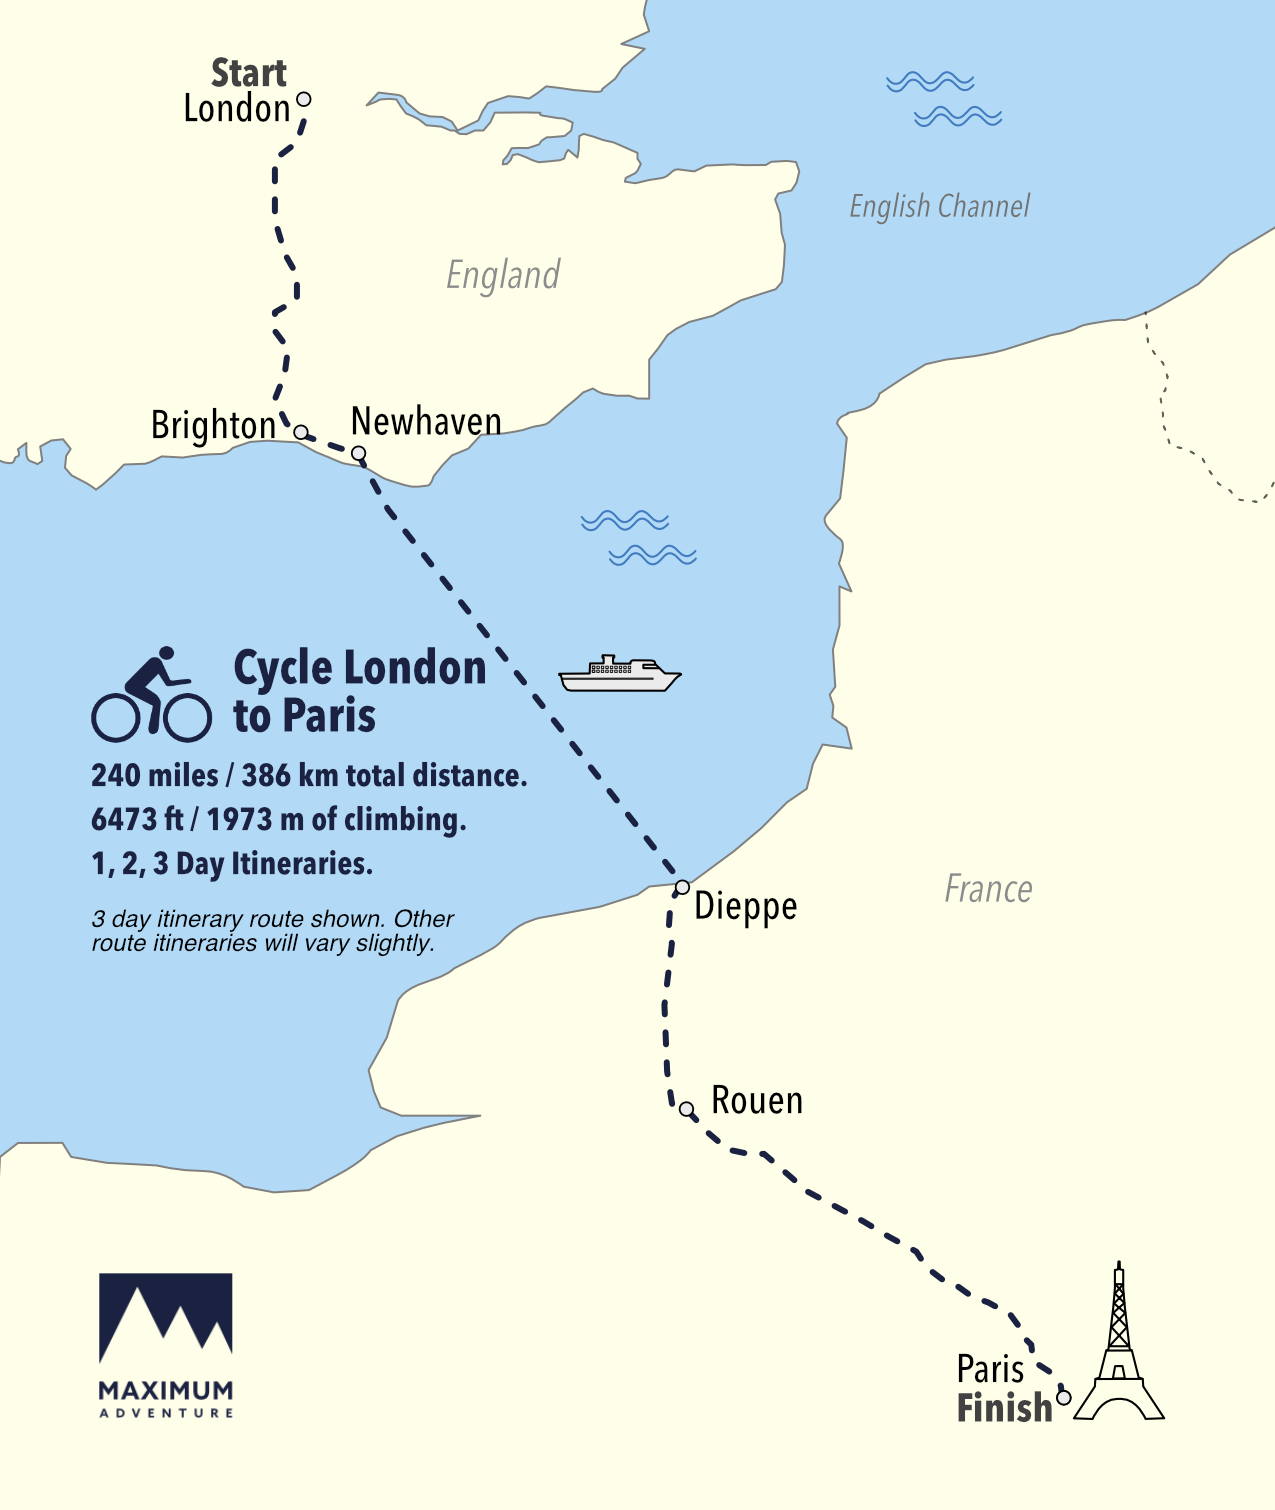 London to Paris Cycle 3 Day Newhaven Dieppe